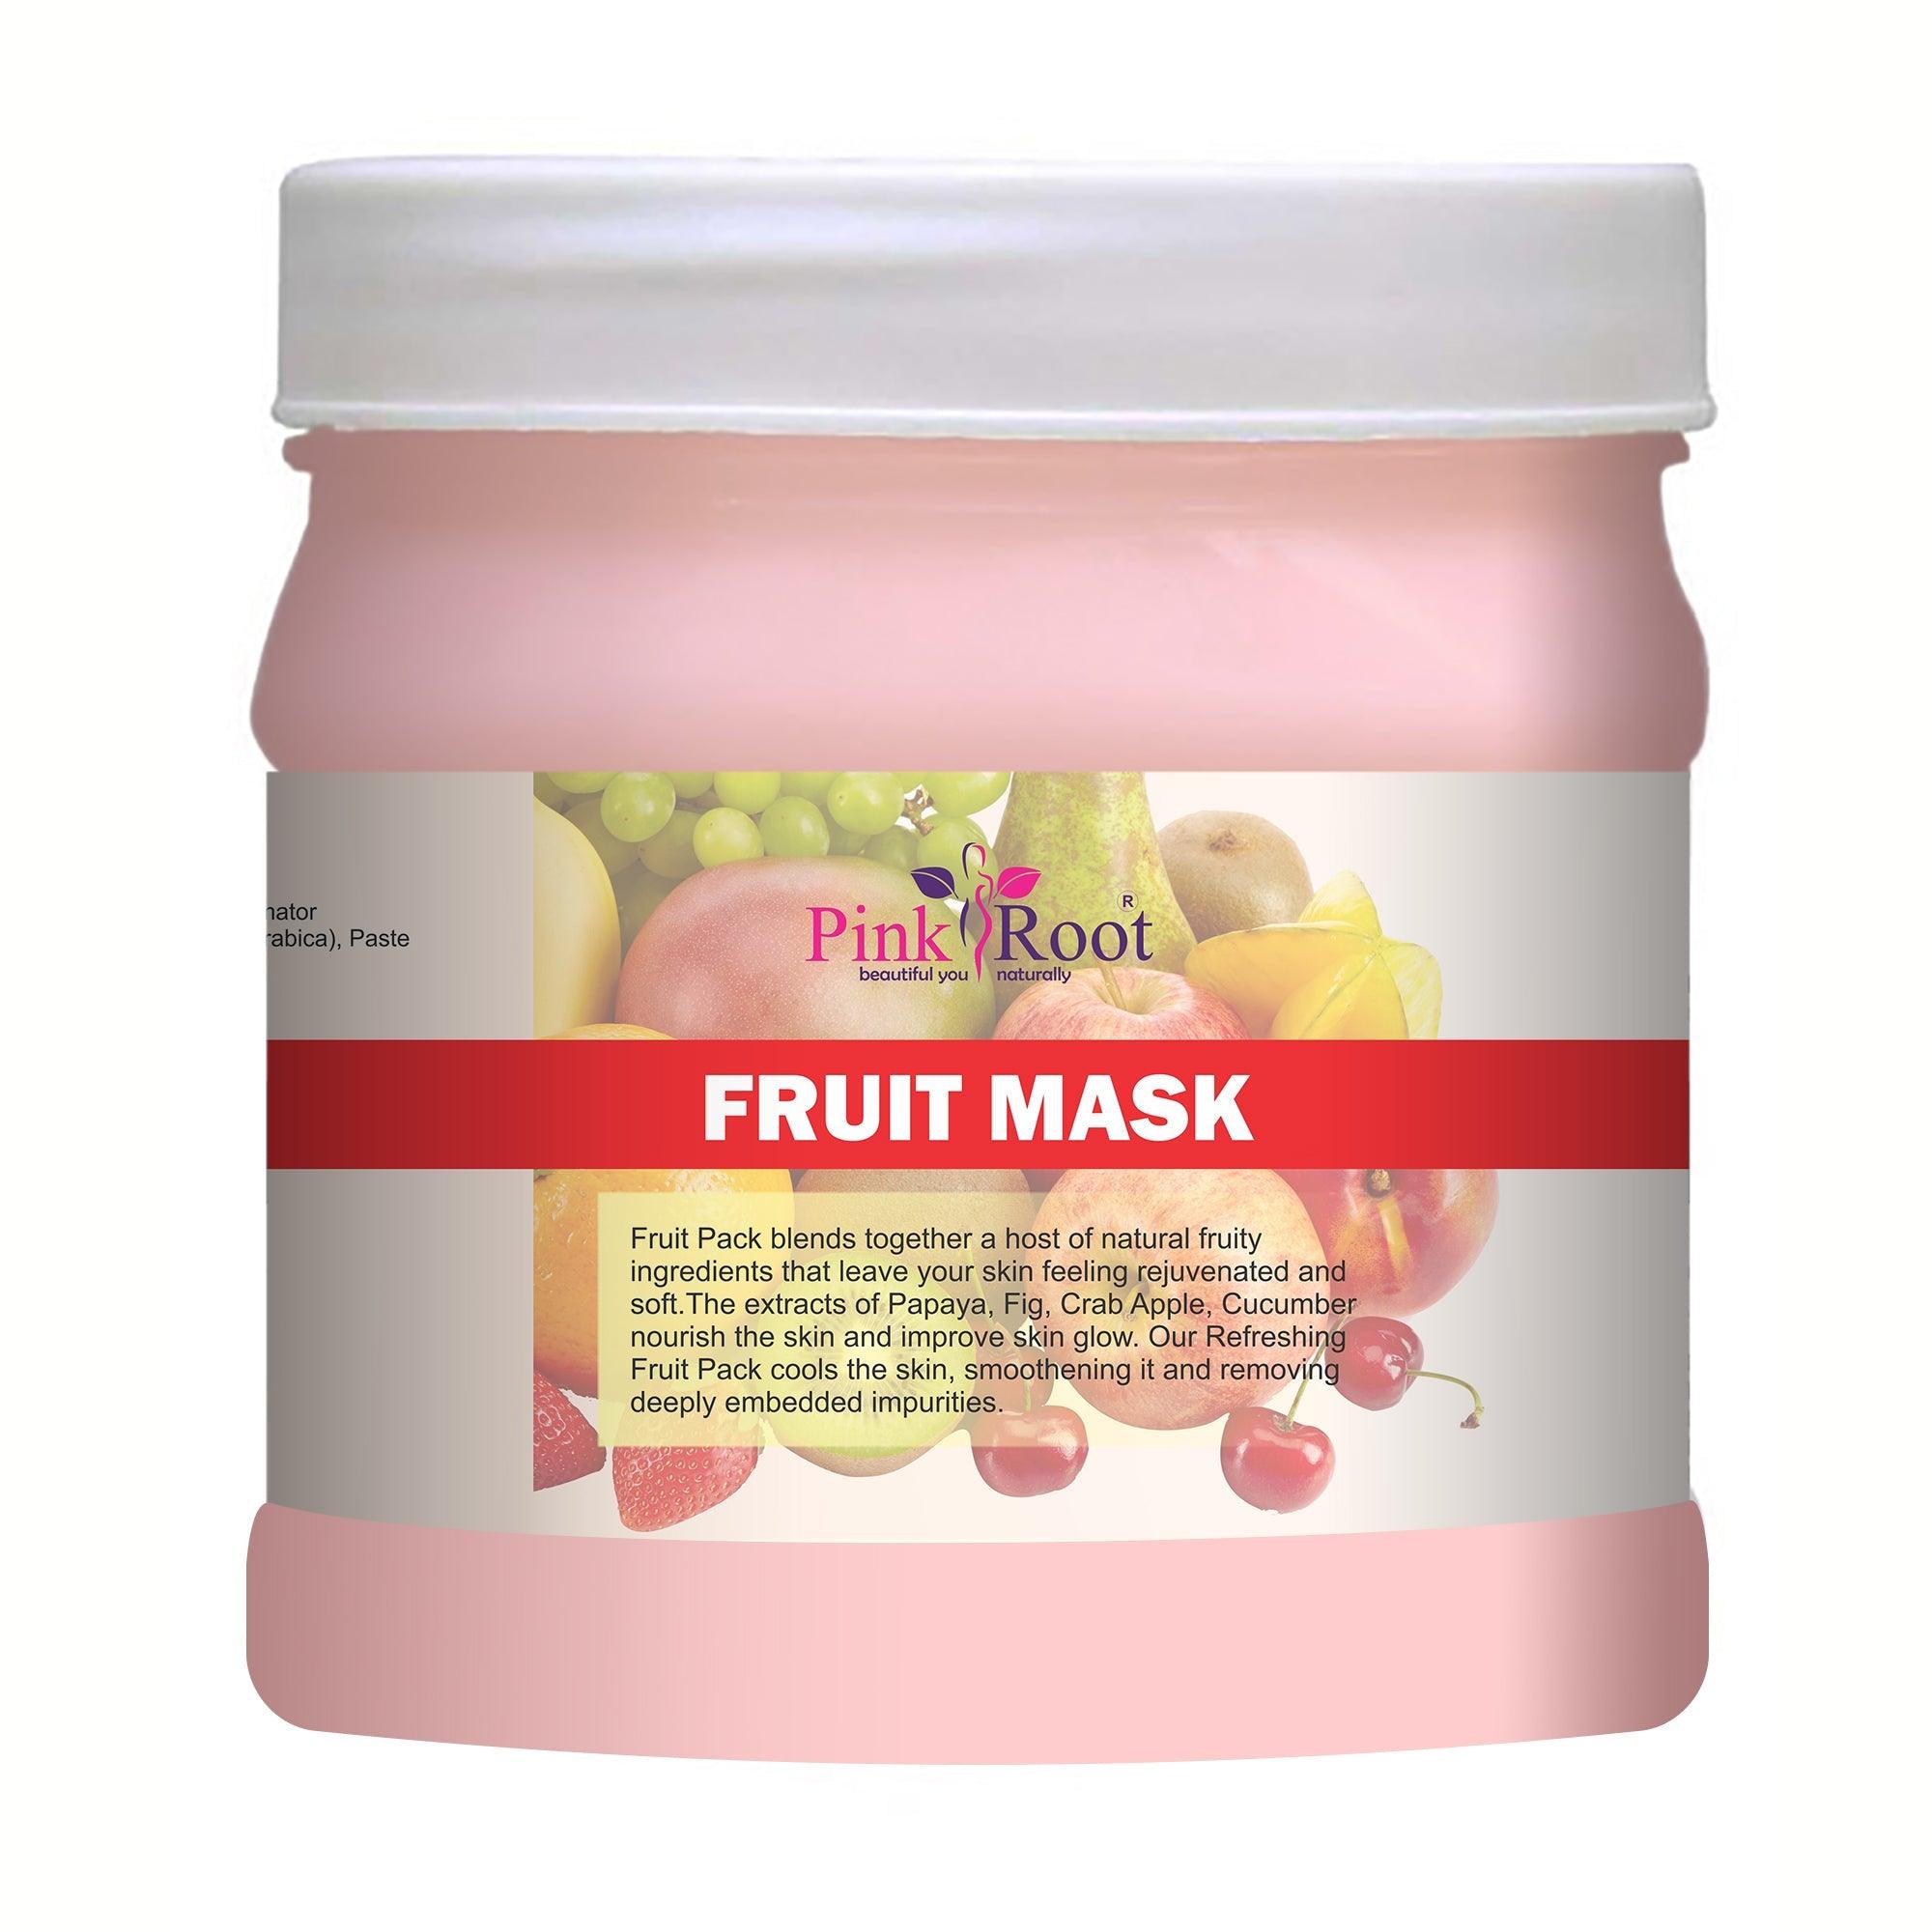 Fruit Mask Enriched with Orange Peel Extract 500gm - Pink Root